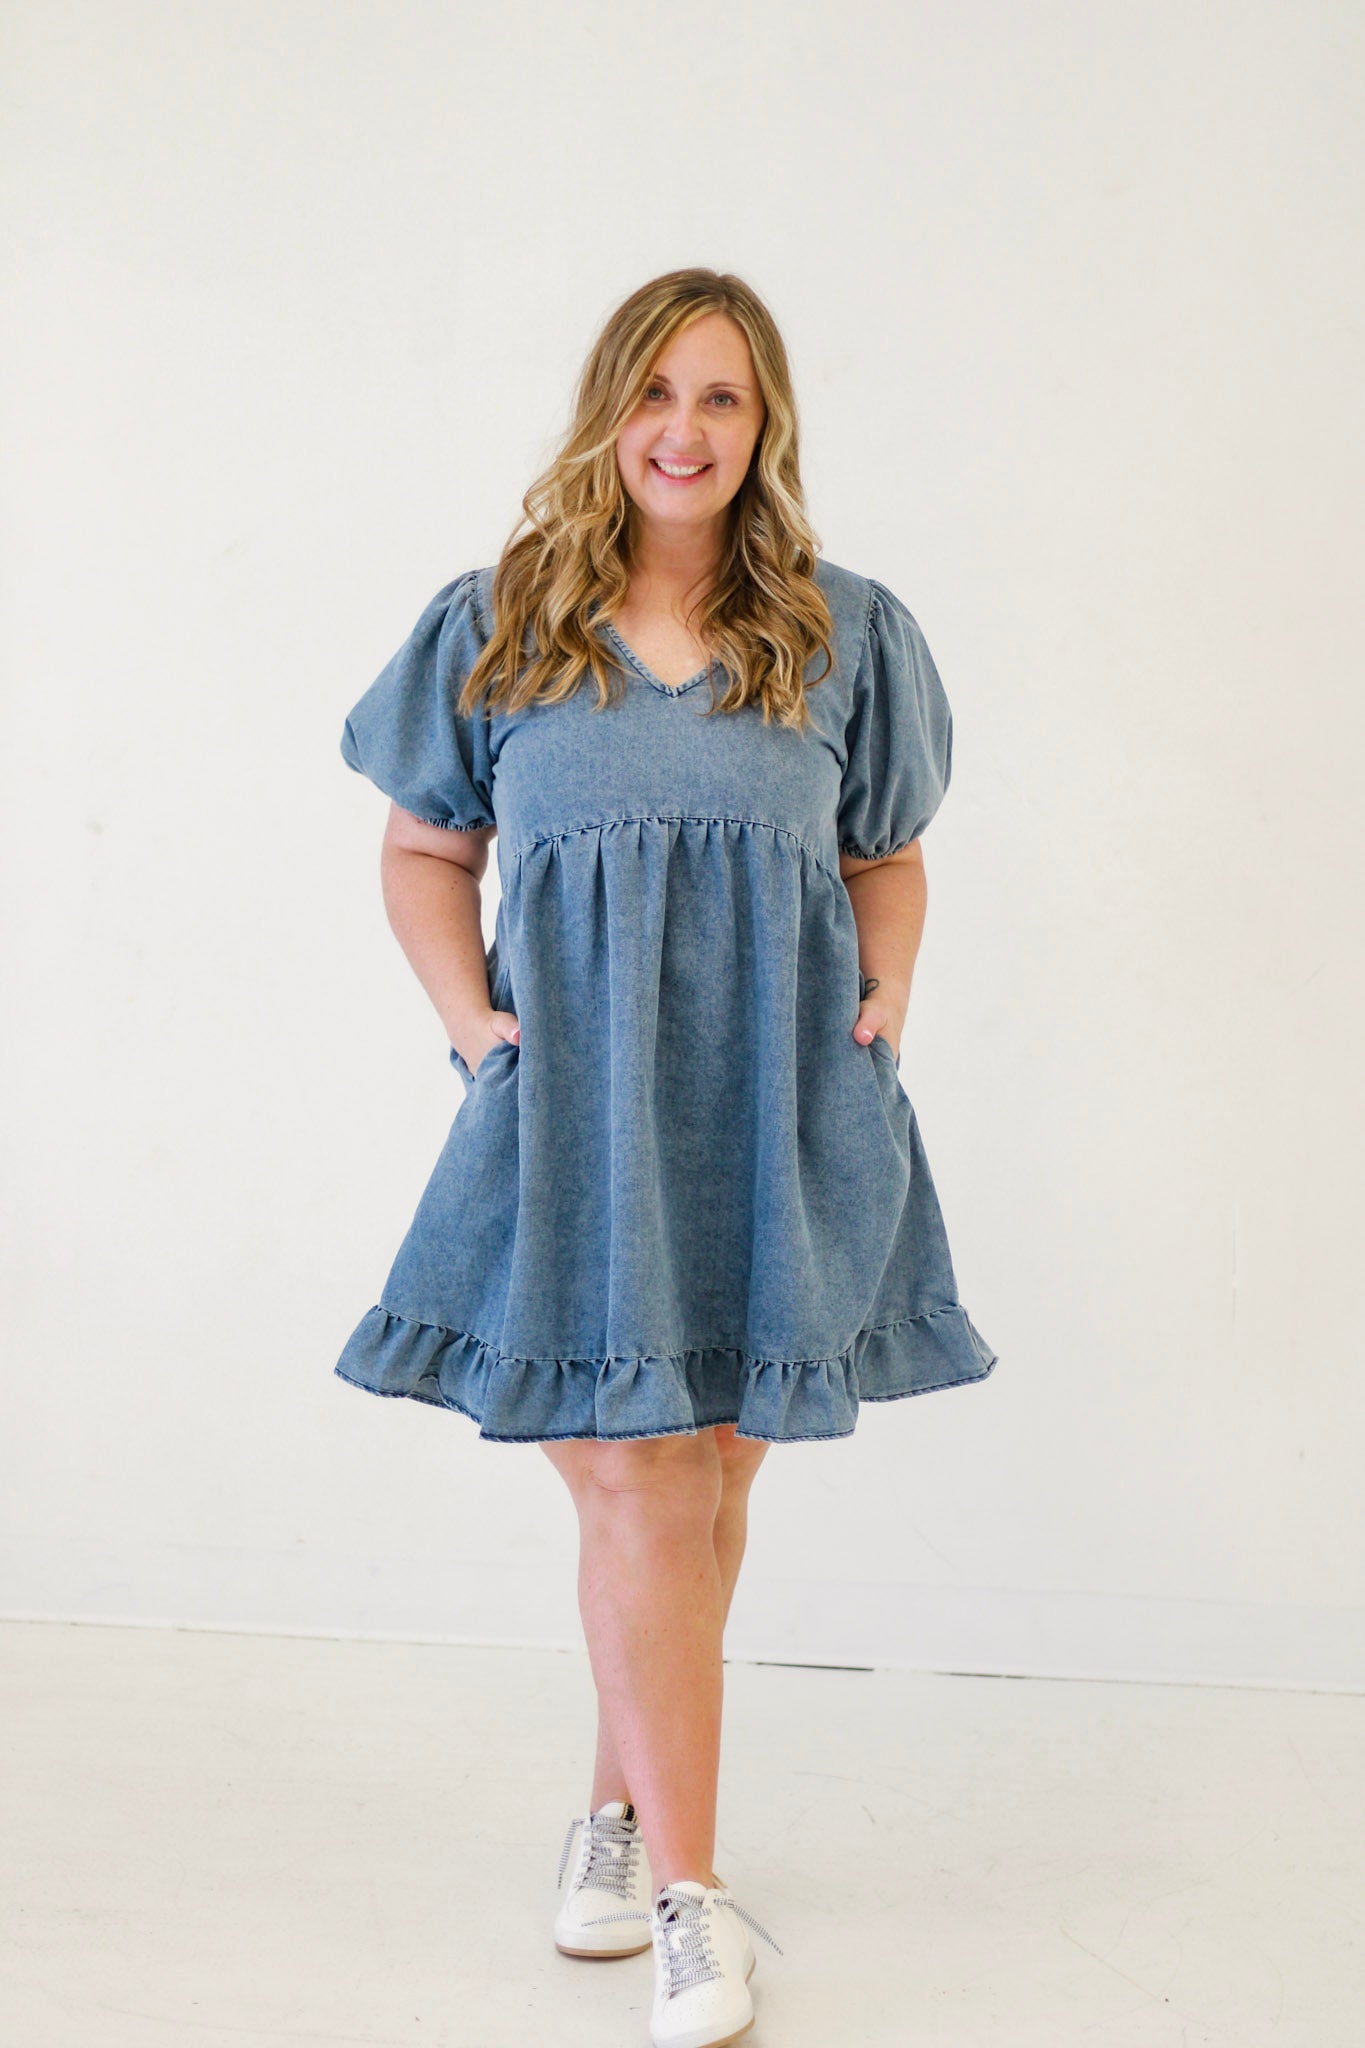 Can't Do Without You Denim Dress